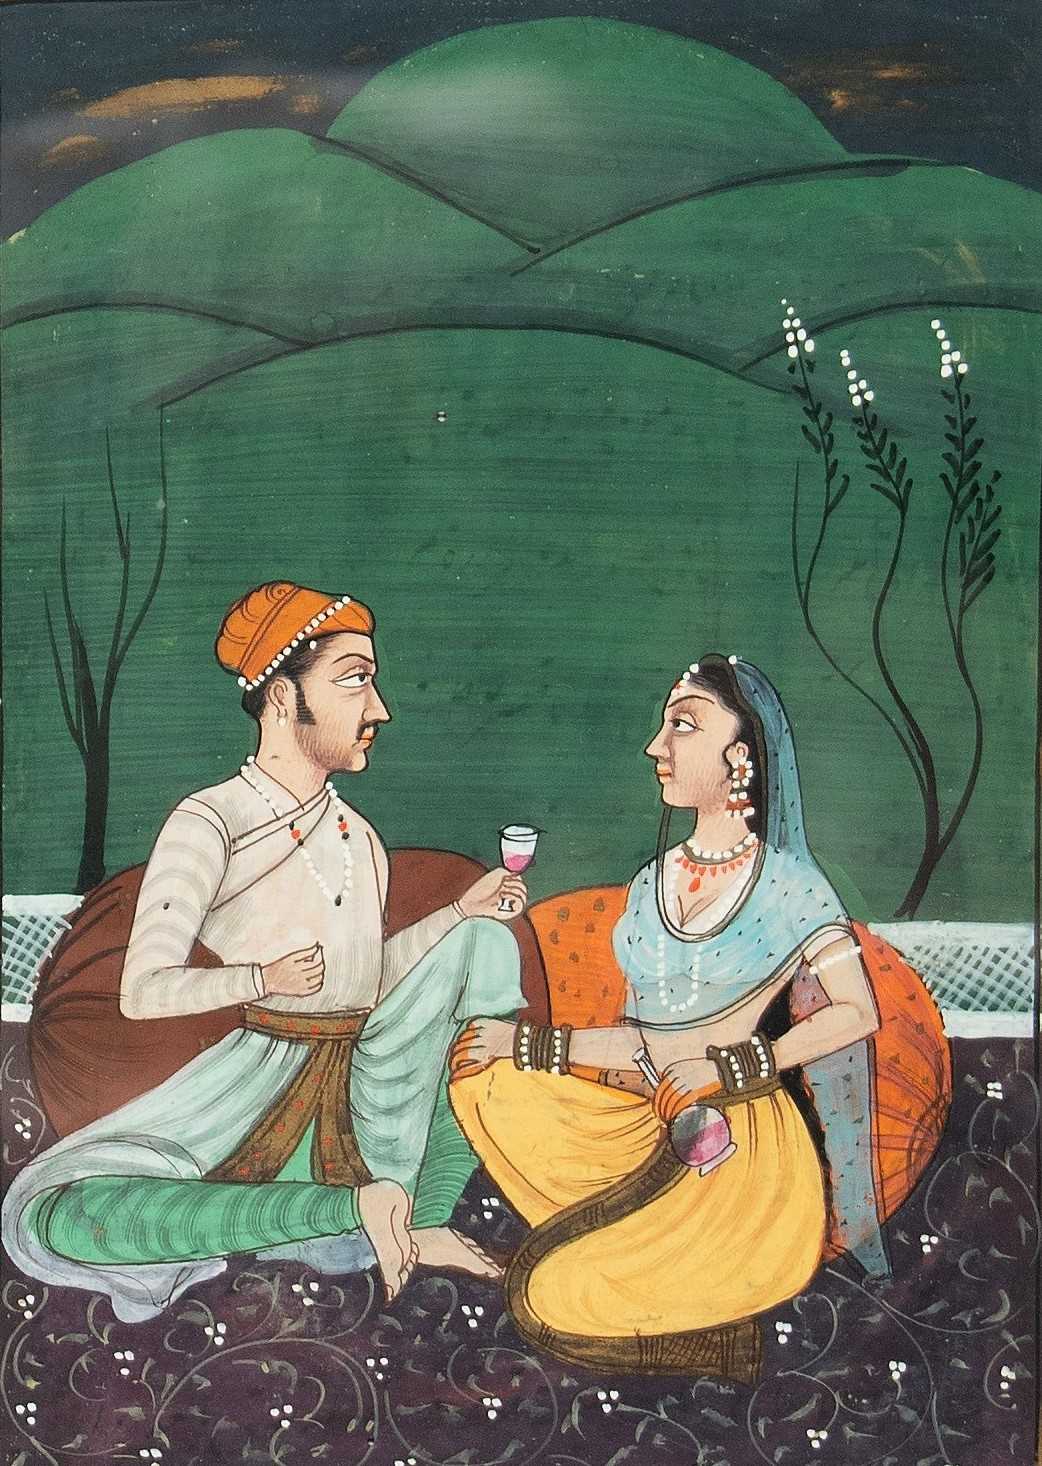 Lot 63 - Indian Miniature Painting of a Prince and Princess